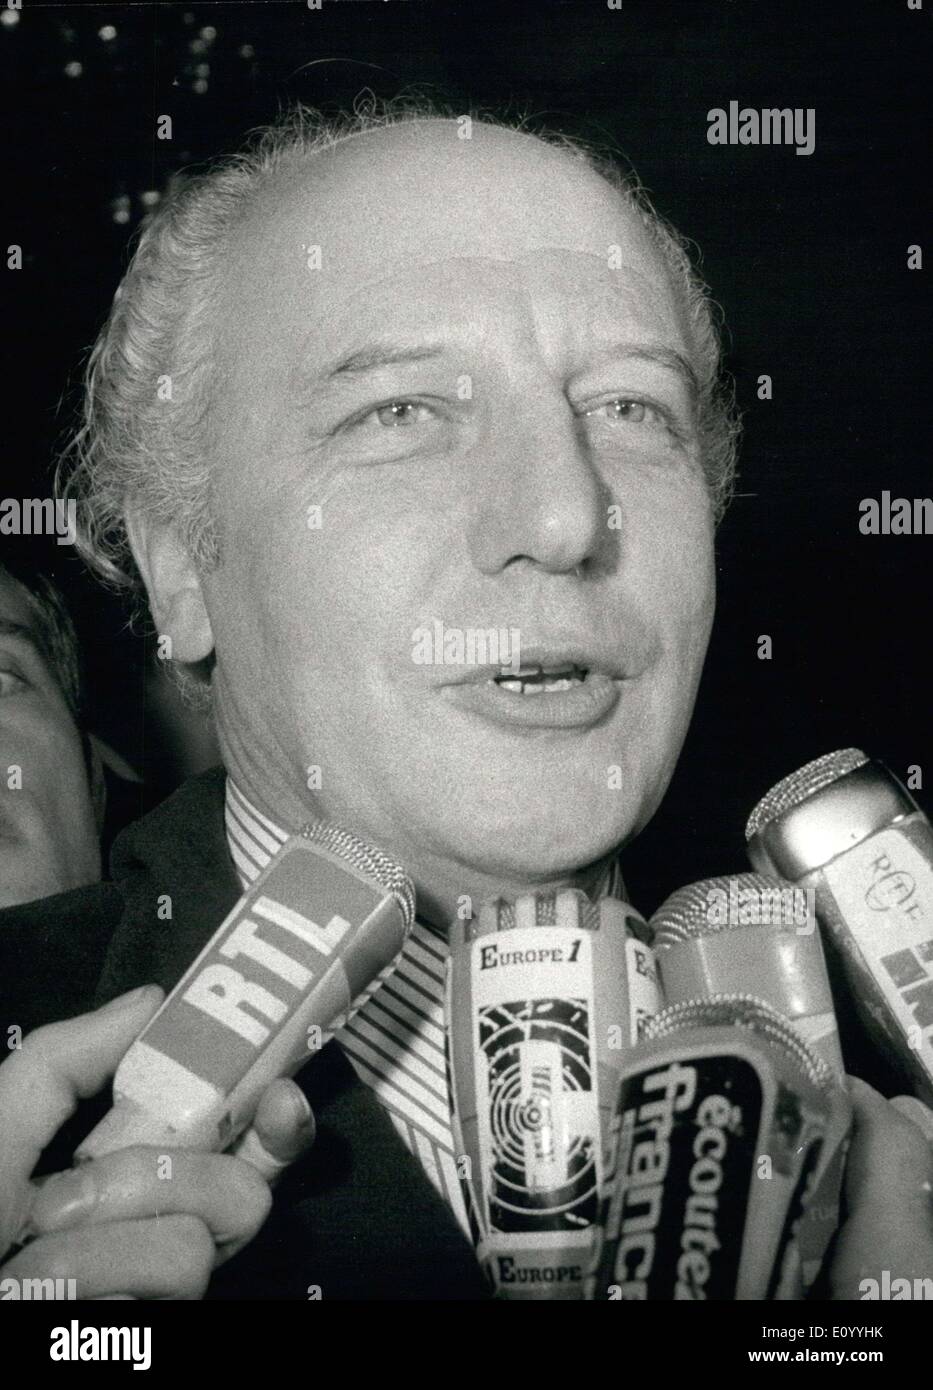 Nov. 20, 1971 - Germany's Minister of Foreign Affairs, Walter Scheel (pictured), was granted an audience with President Pompidou prior to the Brandt-Pompidou summit. Stock Photo